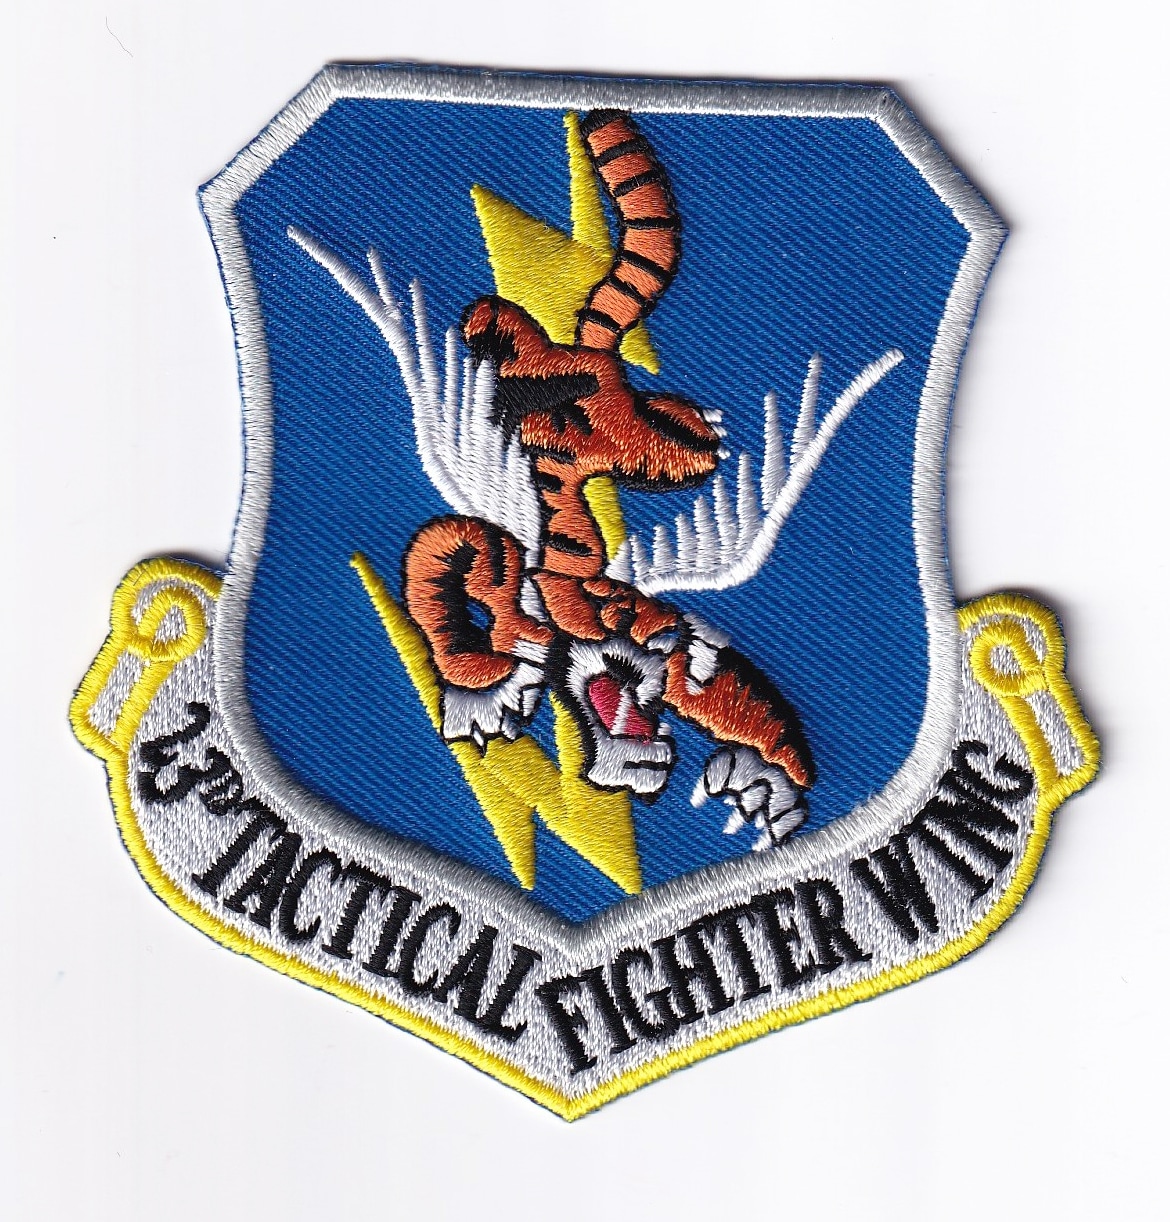 23rd TFW Flying Tigers Patch - Plastic Backing, 3.5"